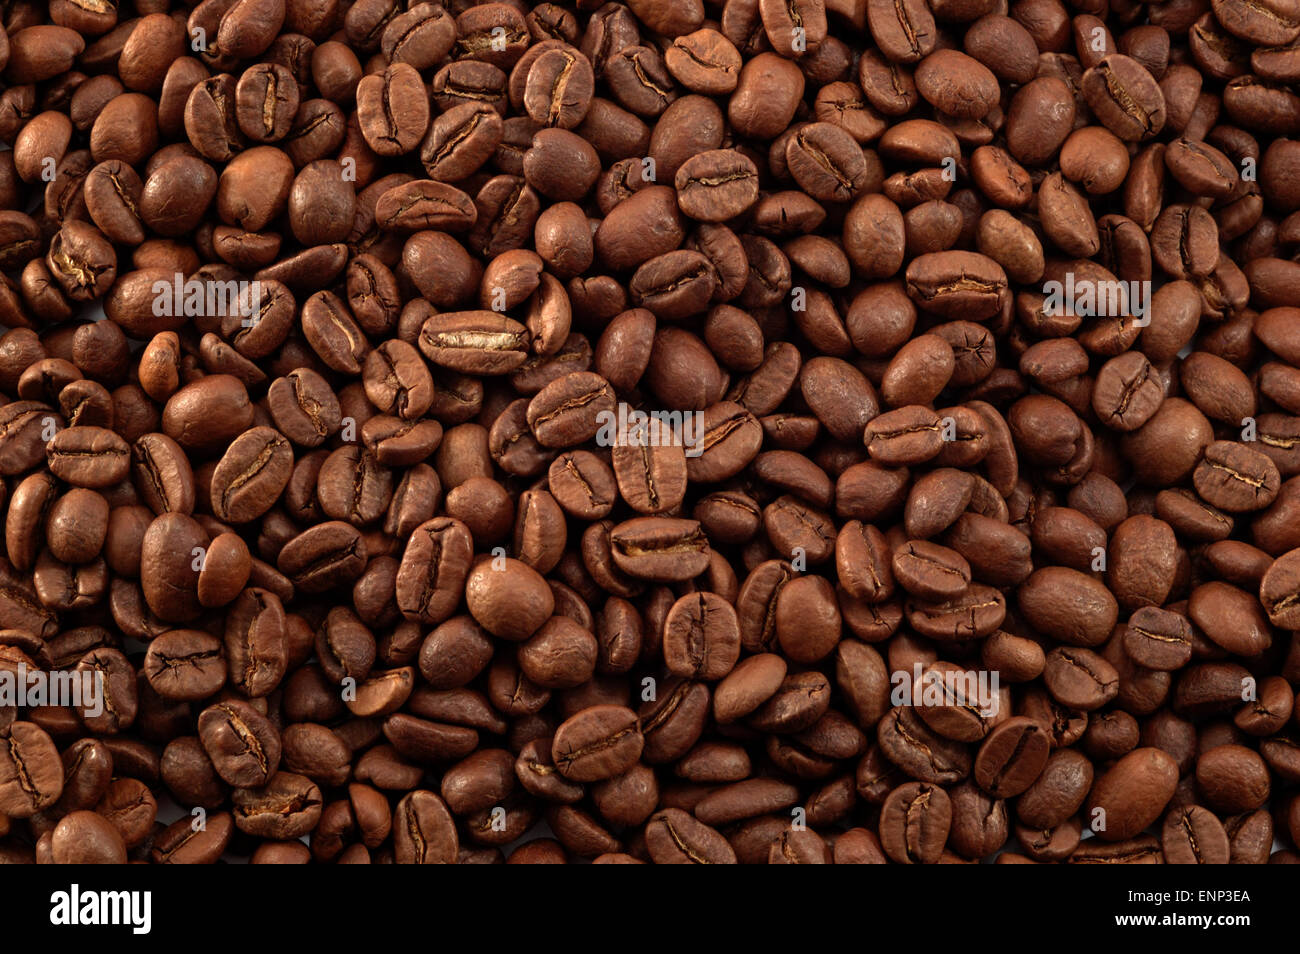 Coffee beans natural background for your food design Stock Photo